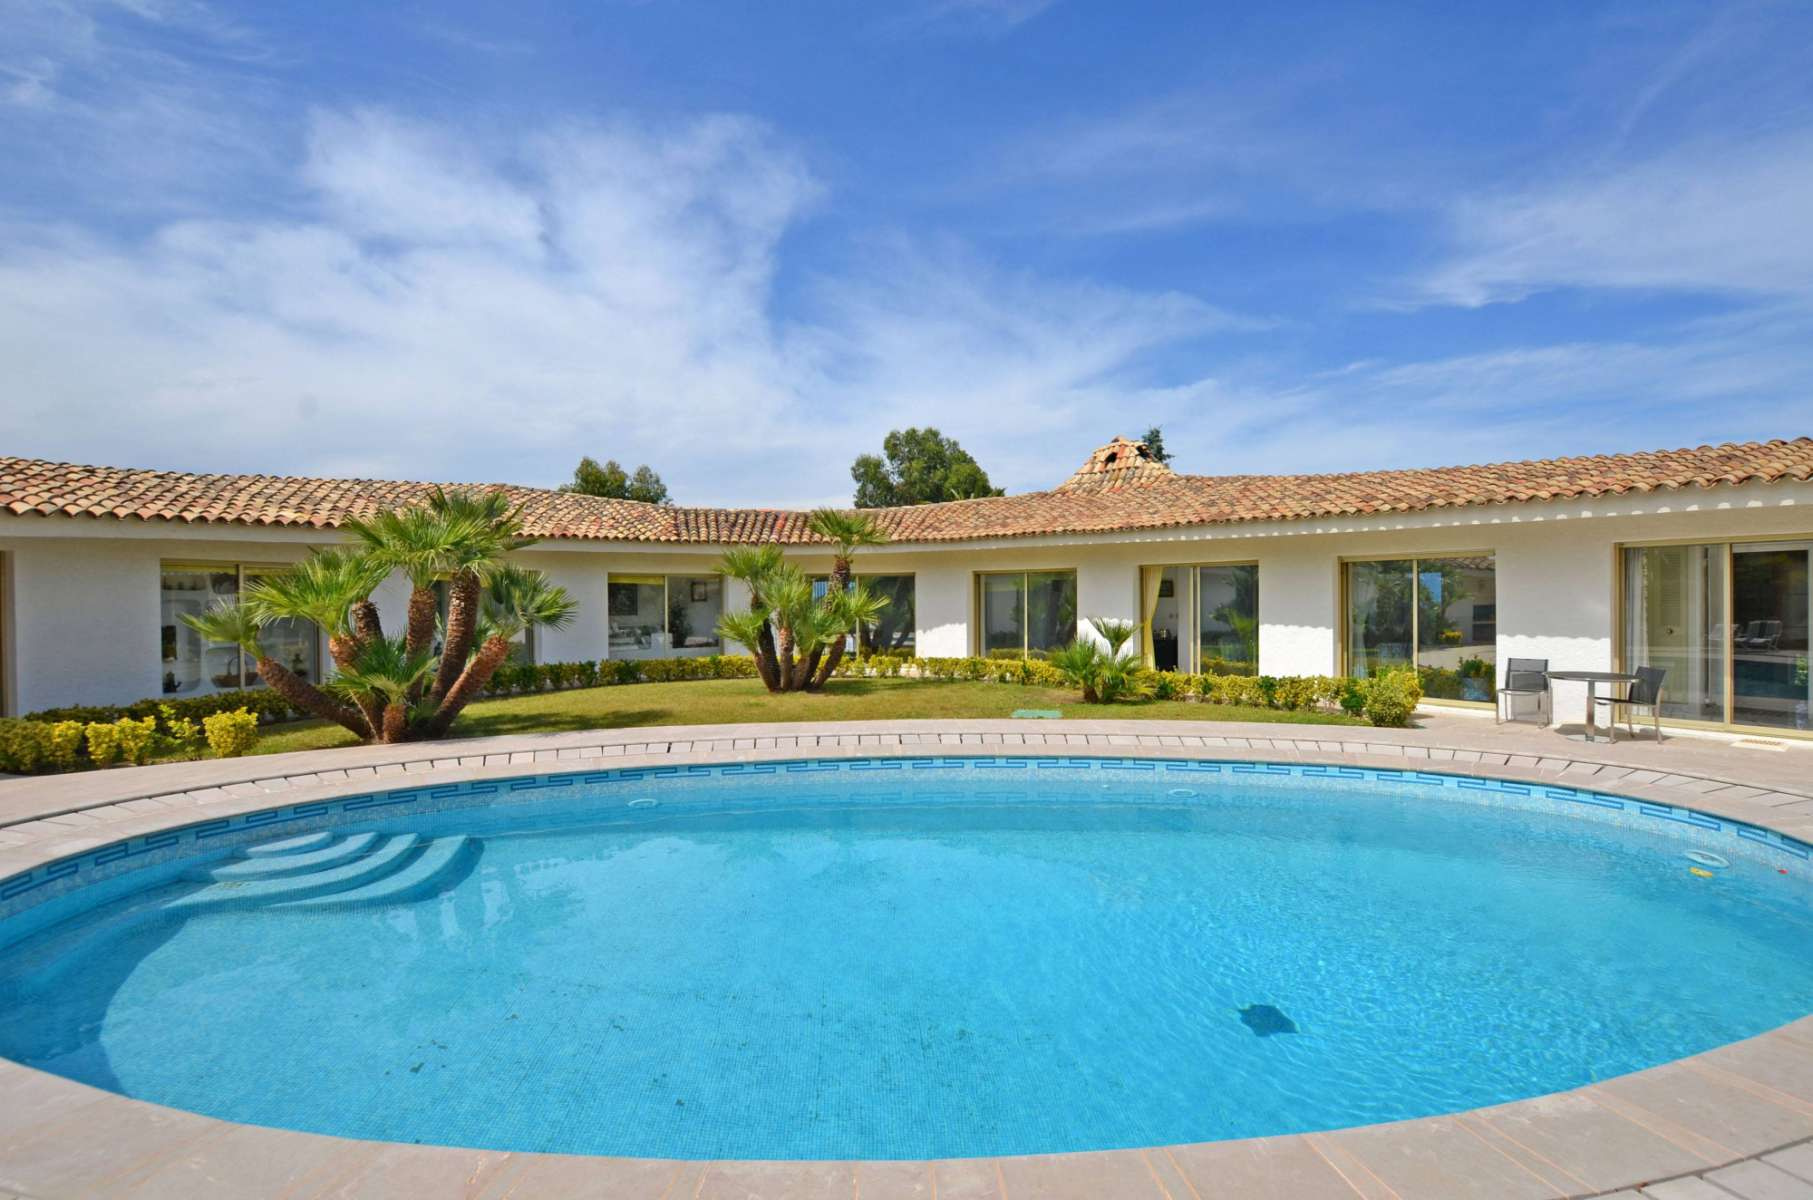 Villa designed by a Dutch architect to sell in Cannes